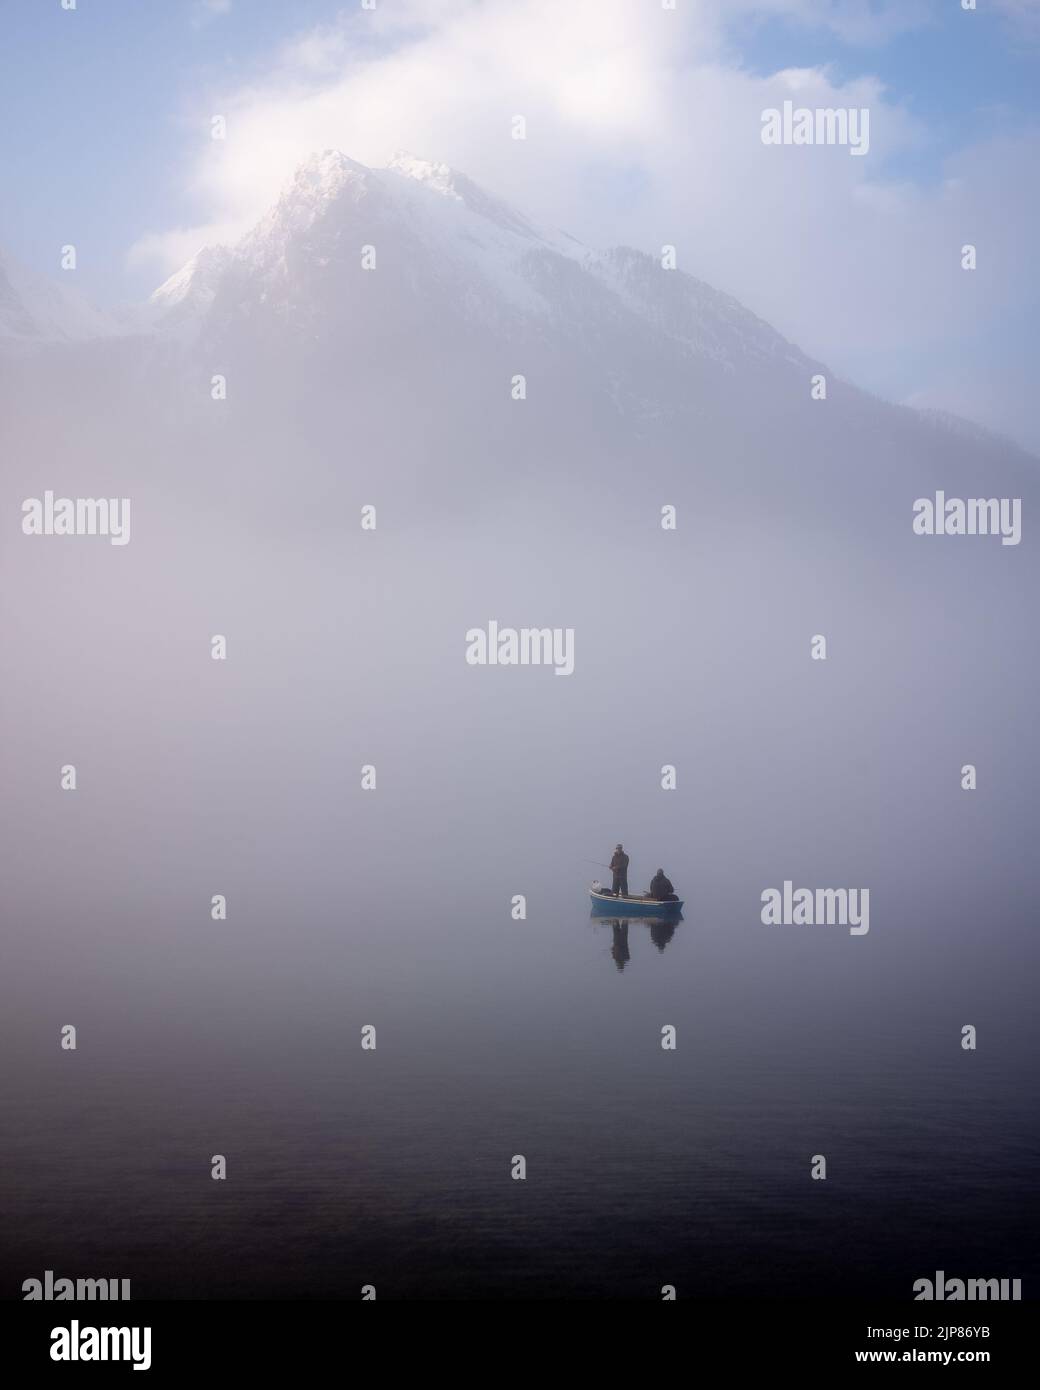 Two men fishing on foggy Hintersee in Bavarian Alps. Stock Photo